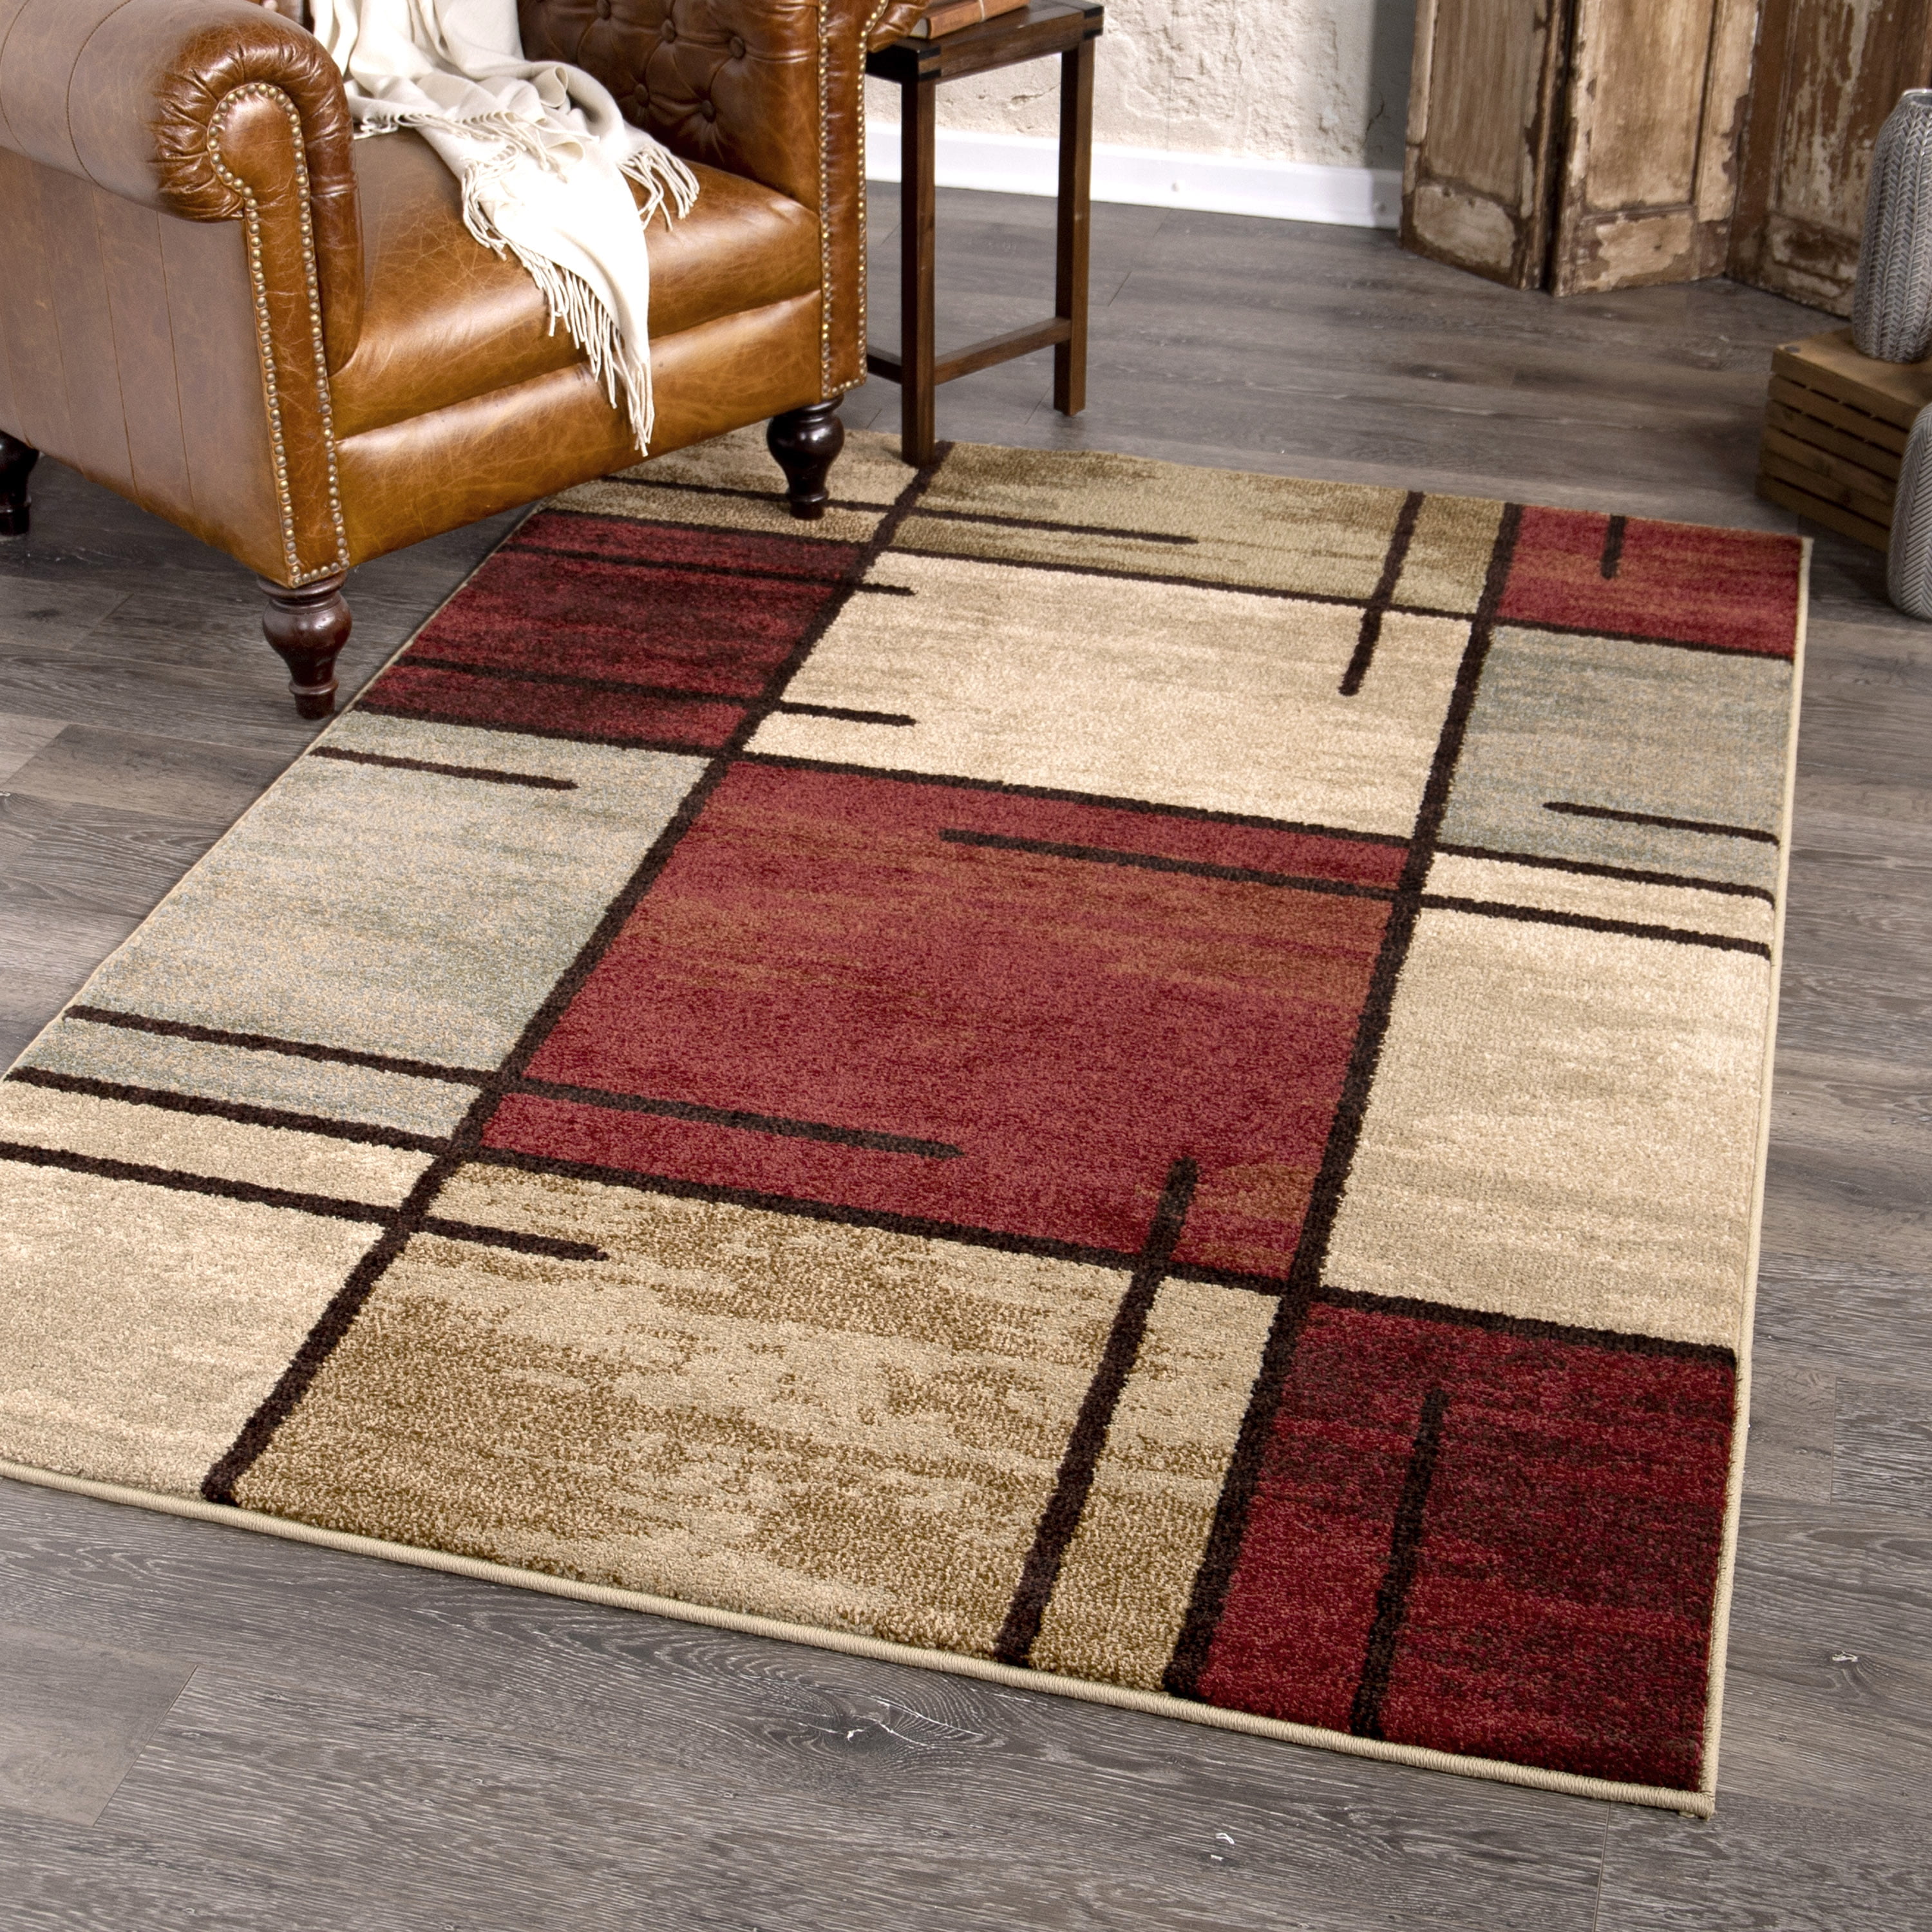 Better Homes & Gardens Spice Grid Area Rug, Red, 5' x 7